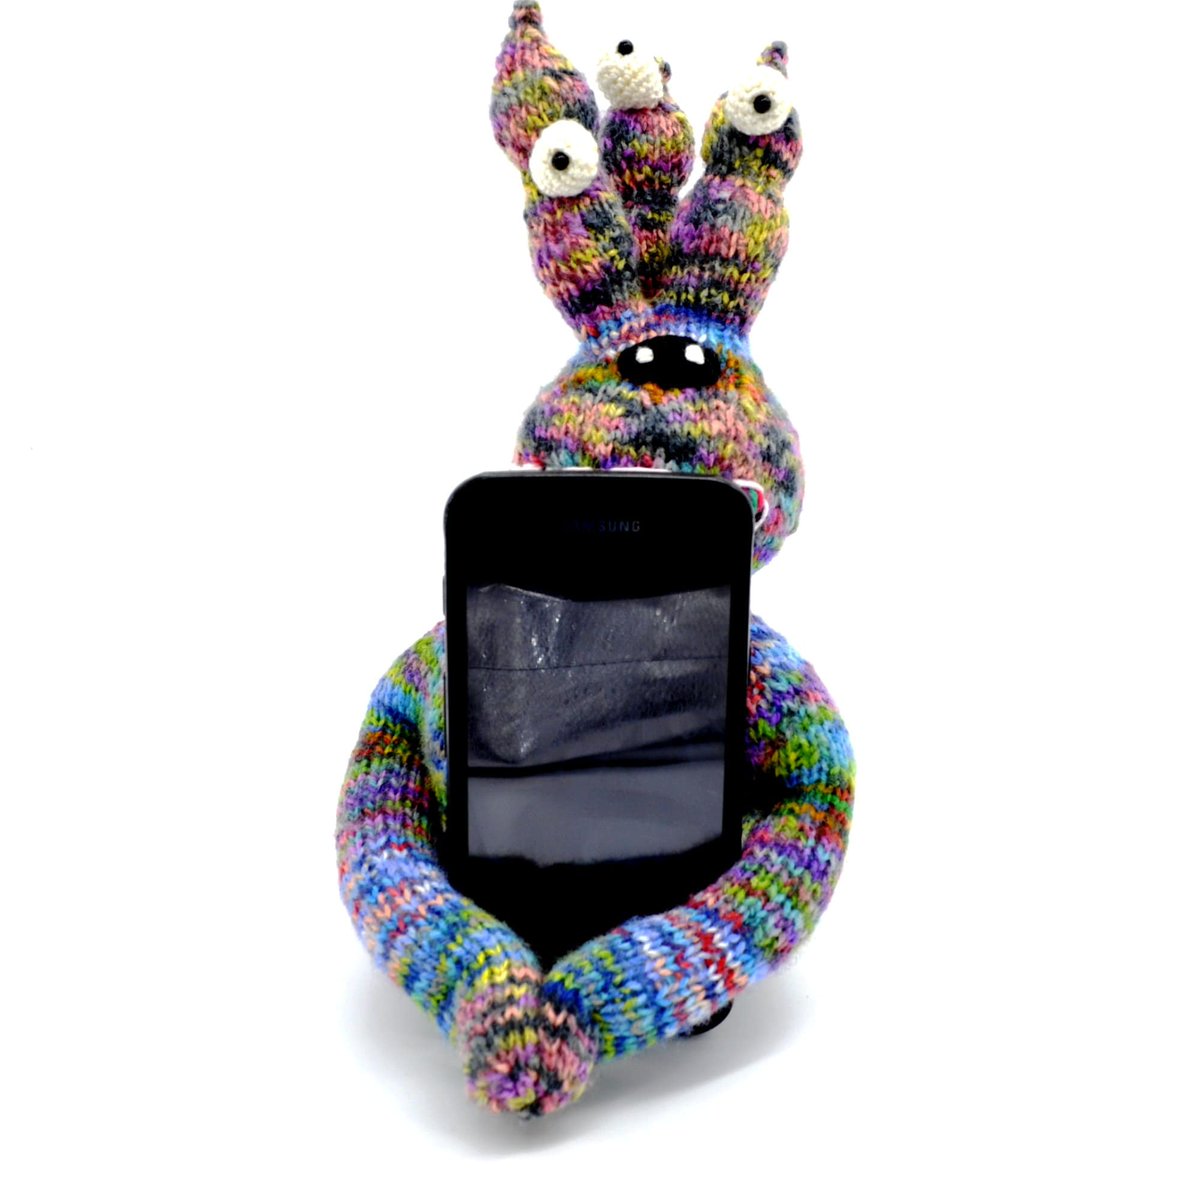 RT @solveigakiran1: Spooktacular Monster Knitted Smartphone Holder,  Monster Phone Stand, Handmade Mobile Monster Gift, Cell Phone pillow tuppu.net/f89ca54f #Pottiteam #htlmphour #shopindie #craftychaching #supportsmallbusiness #Caturday #CraftBizP…